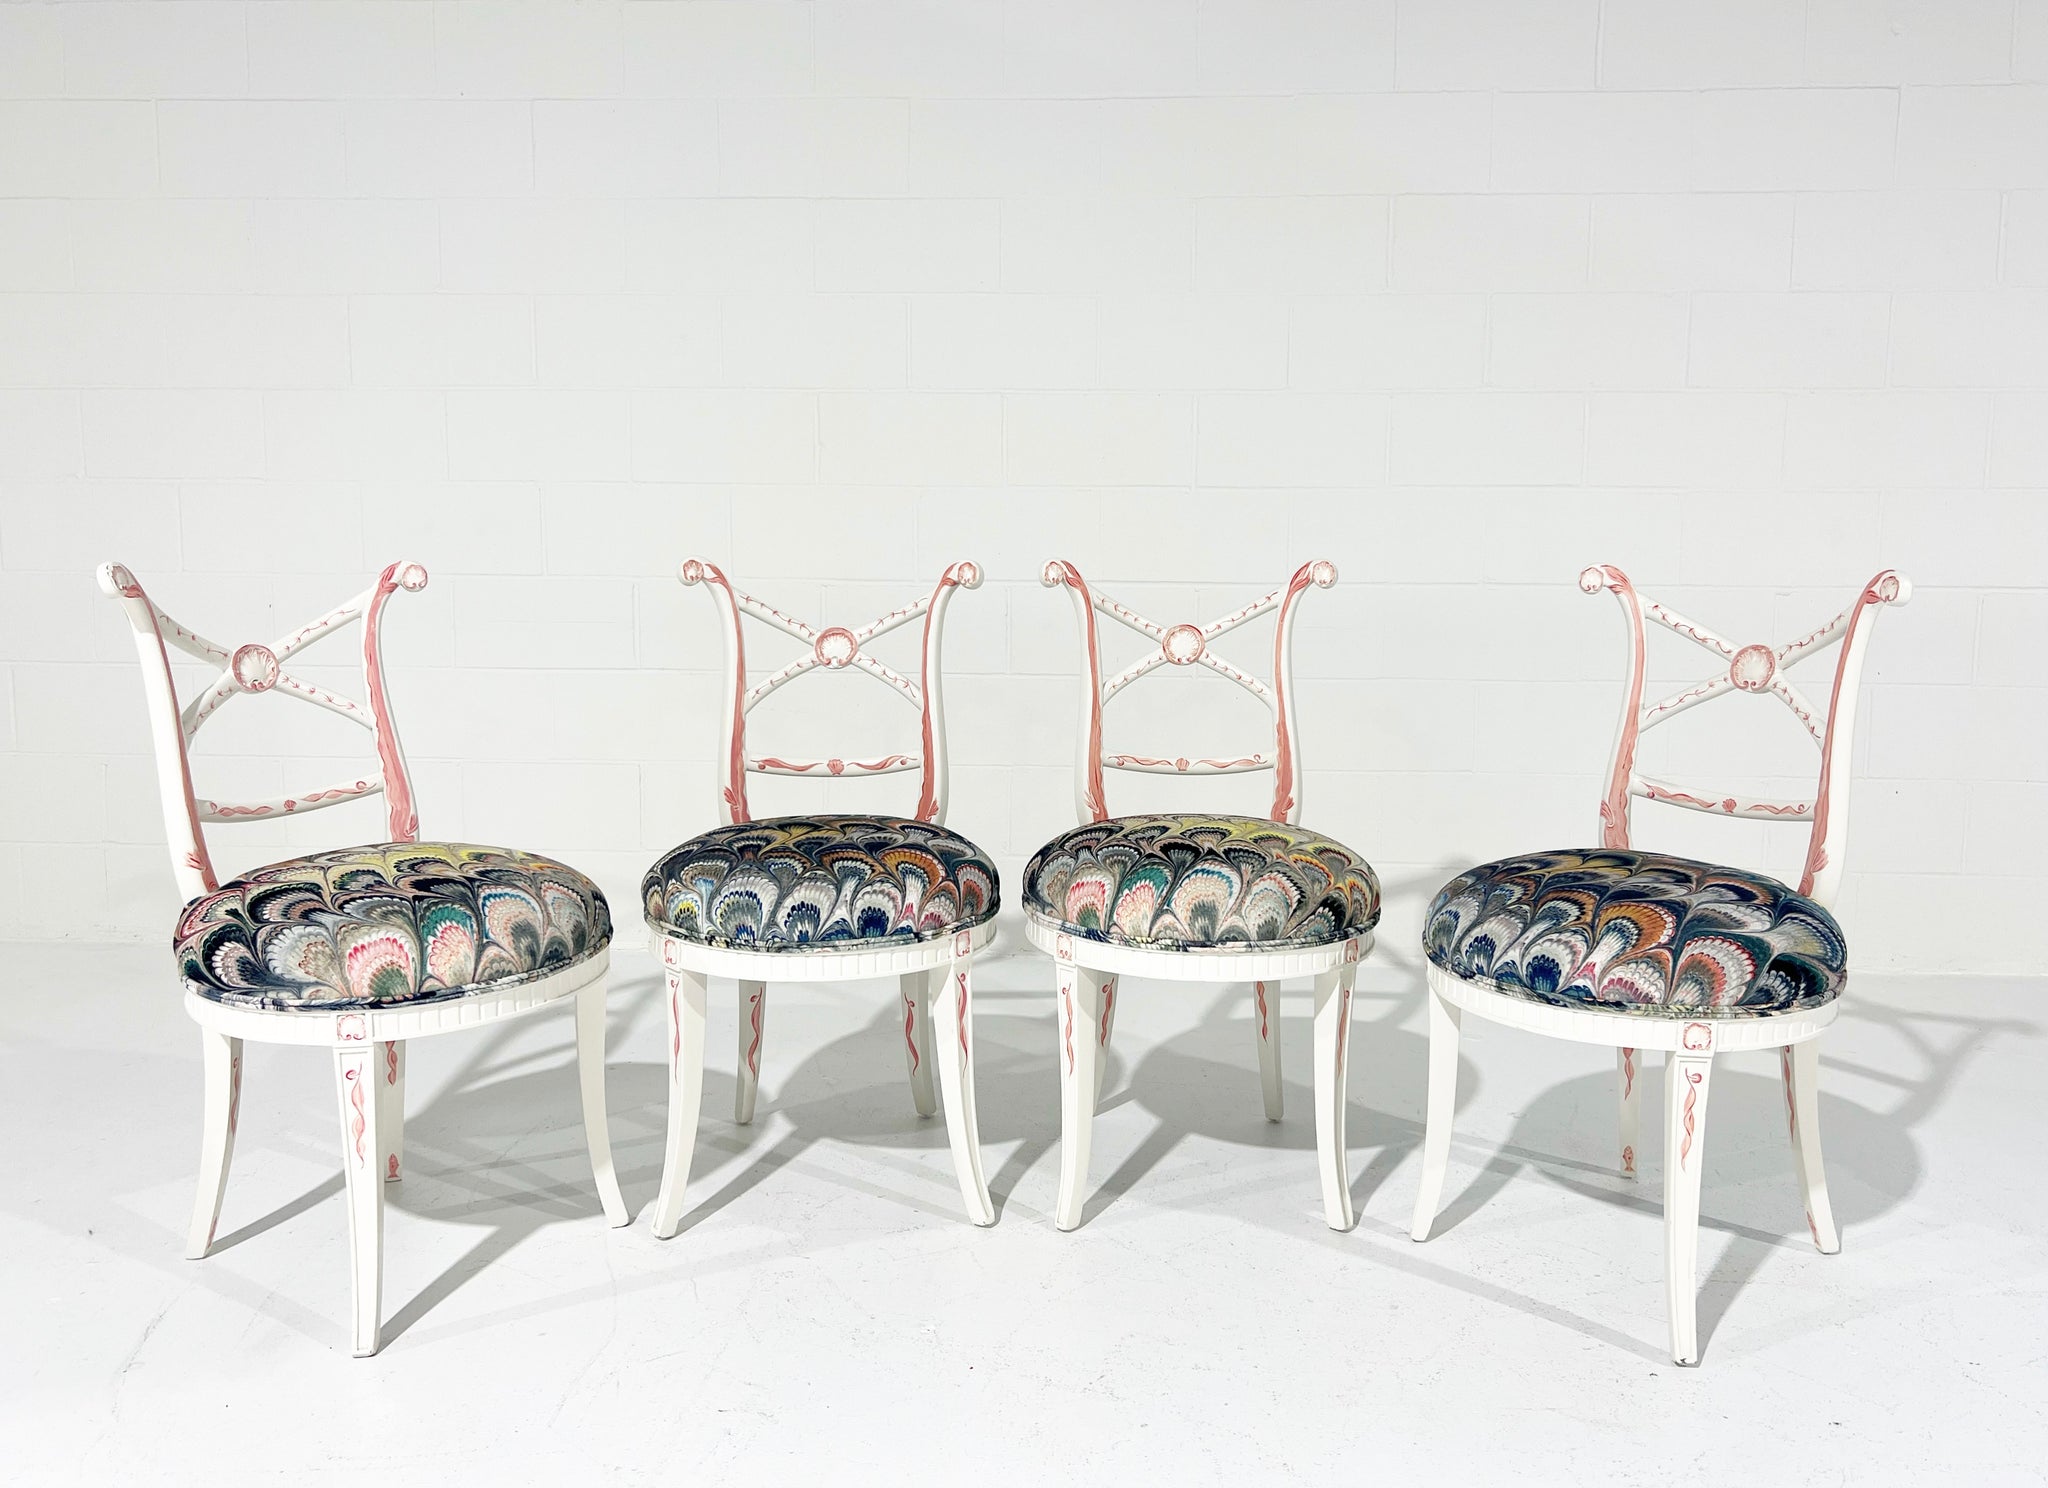 One-of-a-Kind, Hand-Painted 'Sea Monsters' Chairs, Set of 4